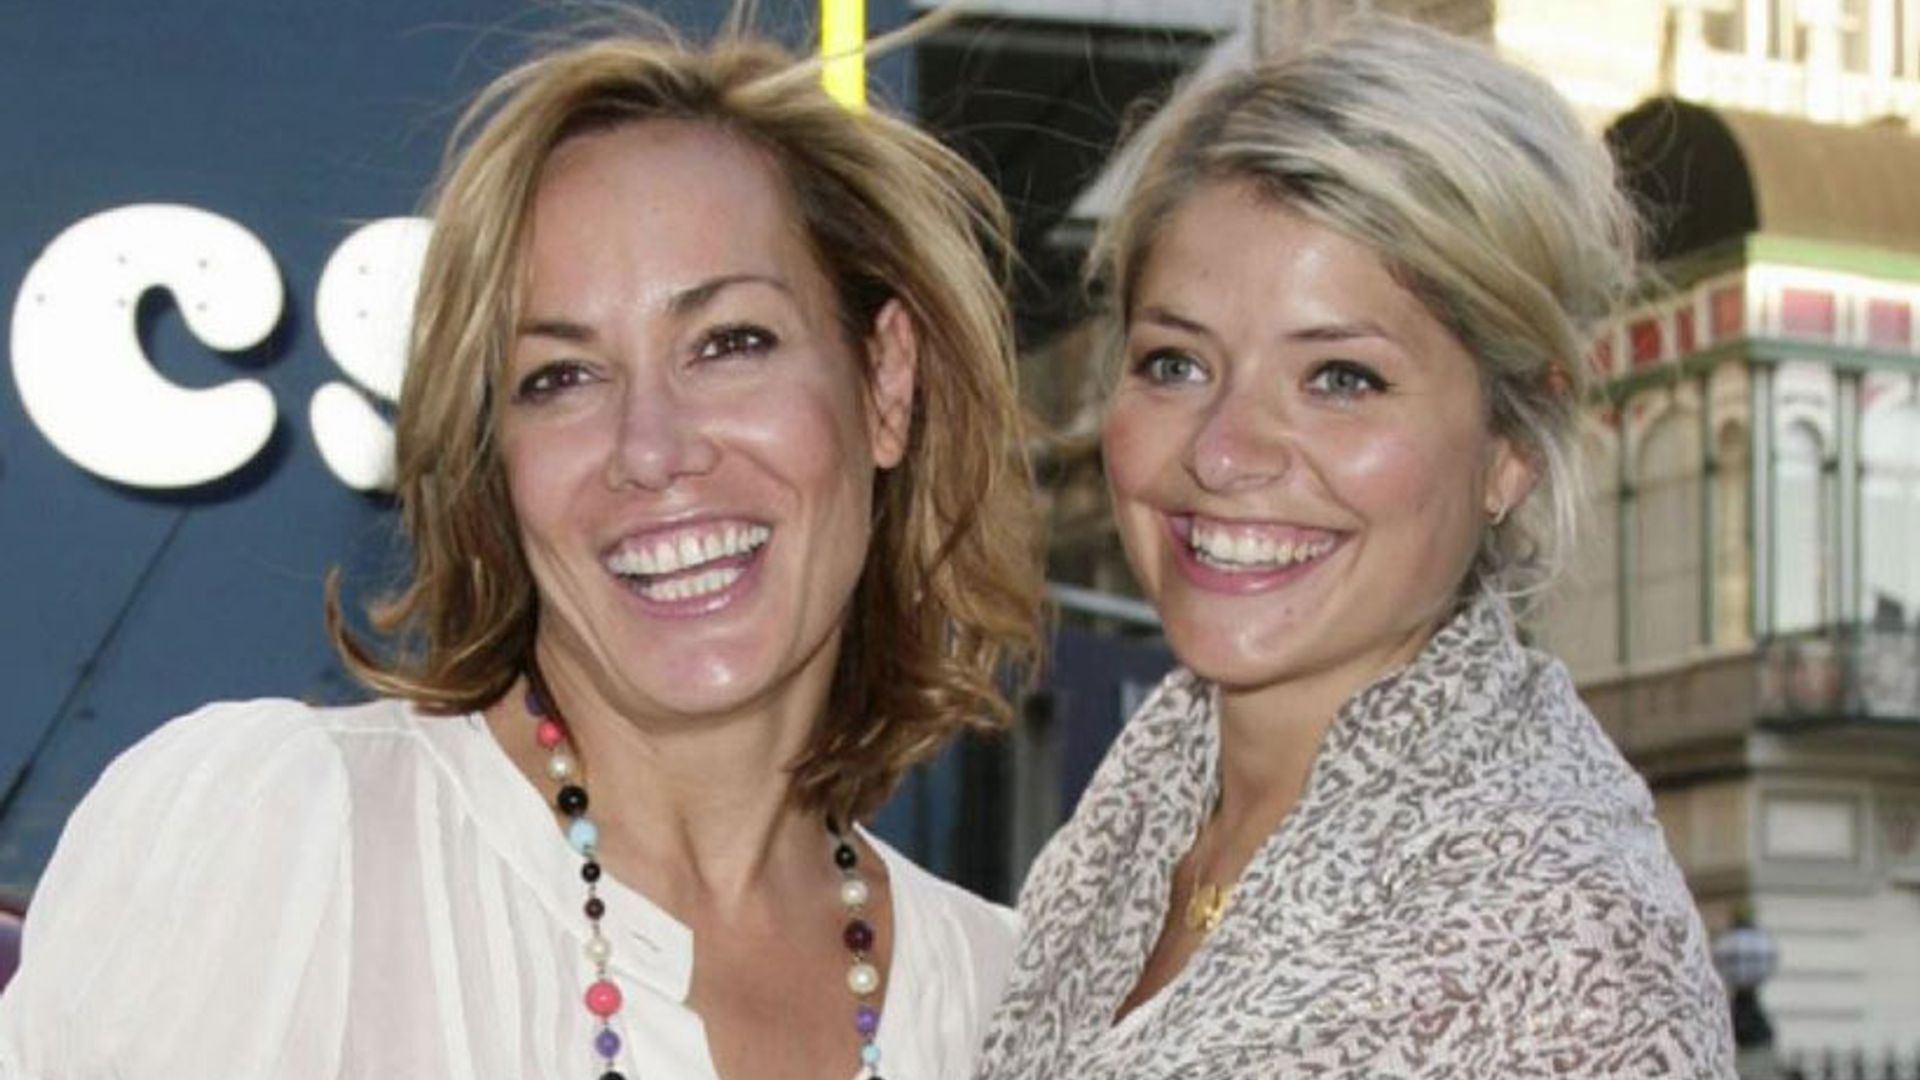 Holly Willoughby pays touching tribute to Tara Palmer-Tomkinson as she discusses their close friendship